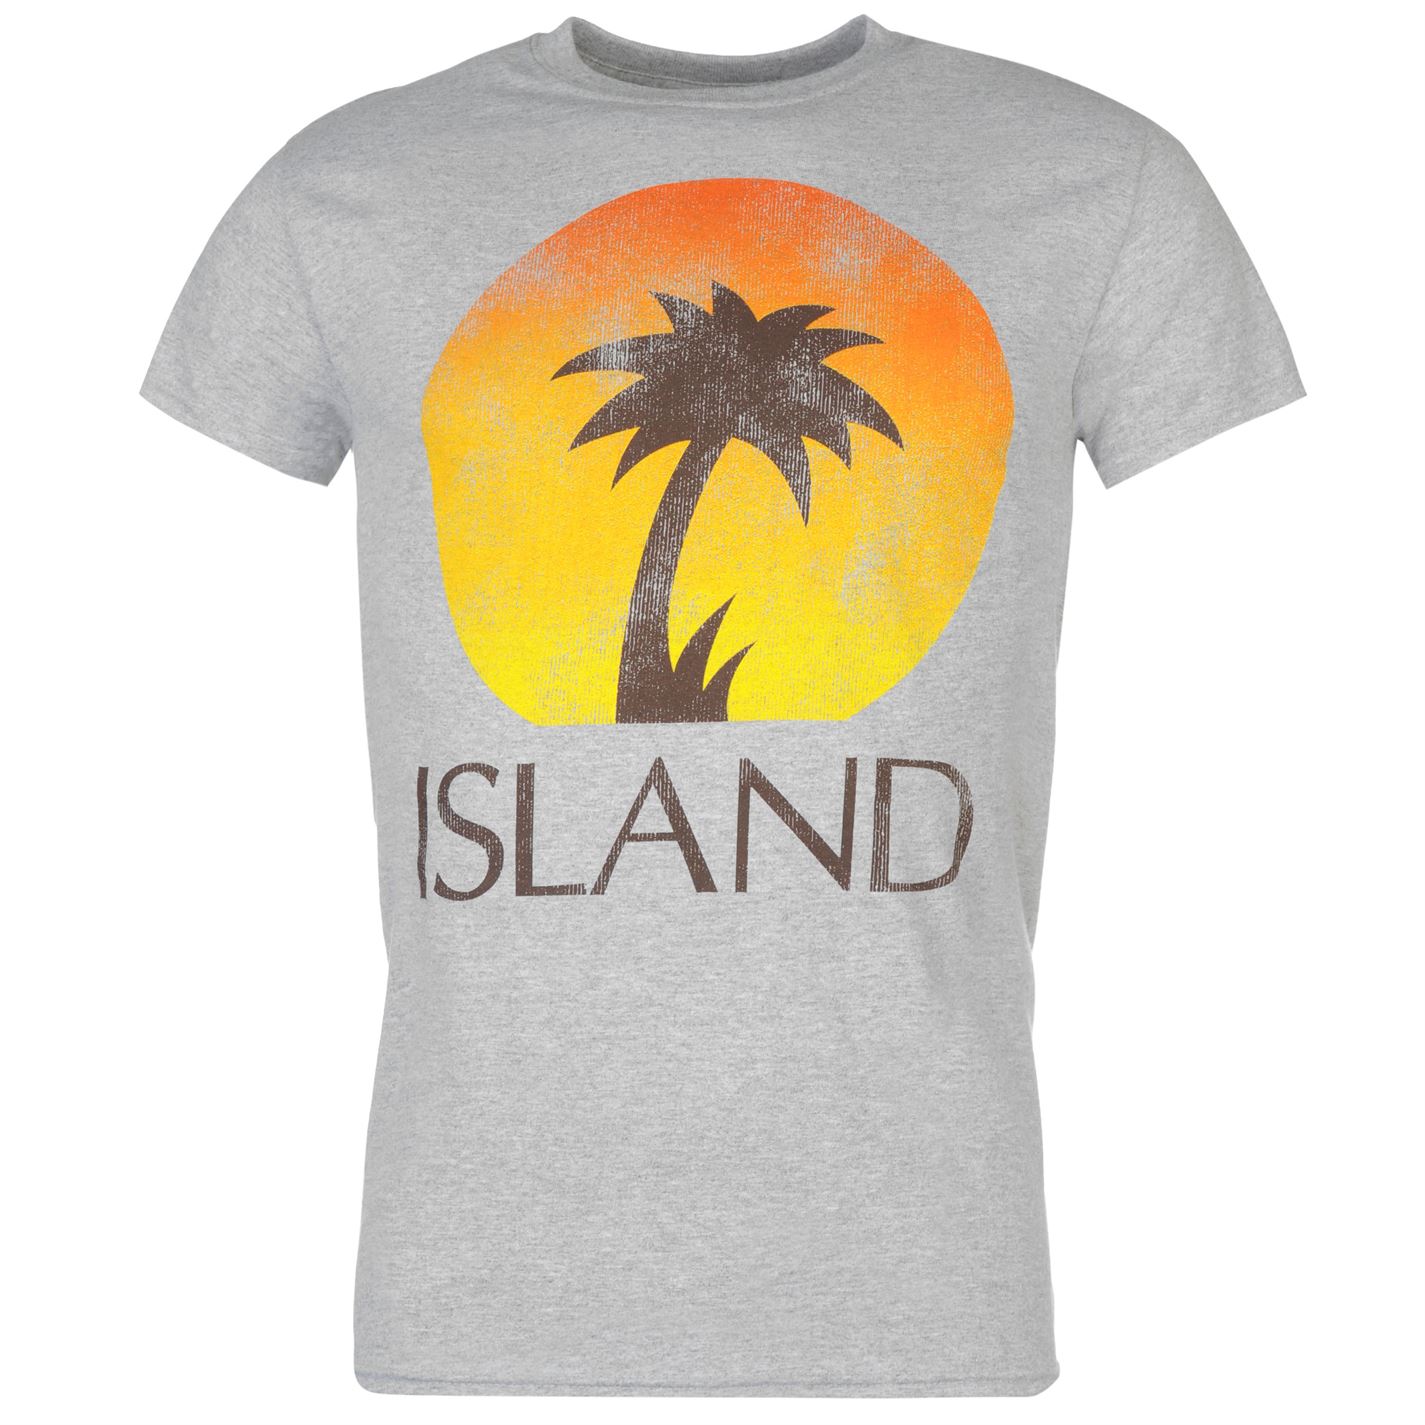 Official Island Records T Shirt Mens